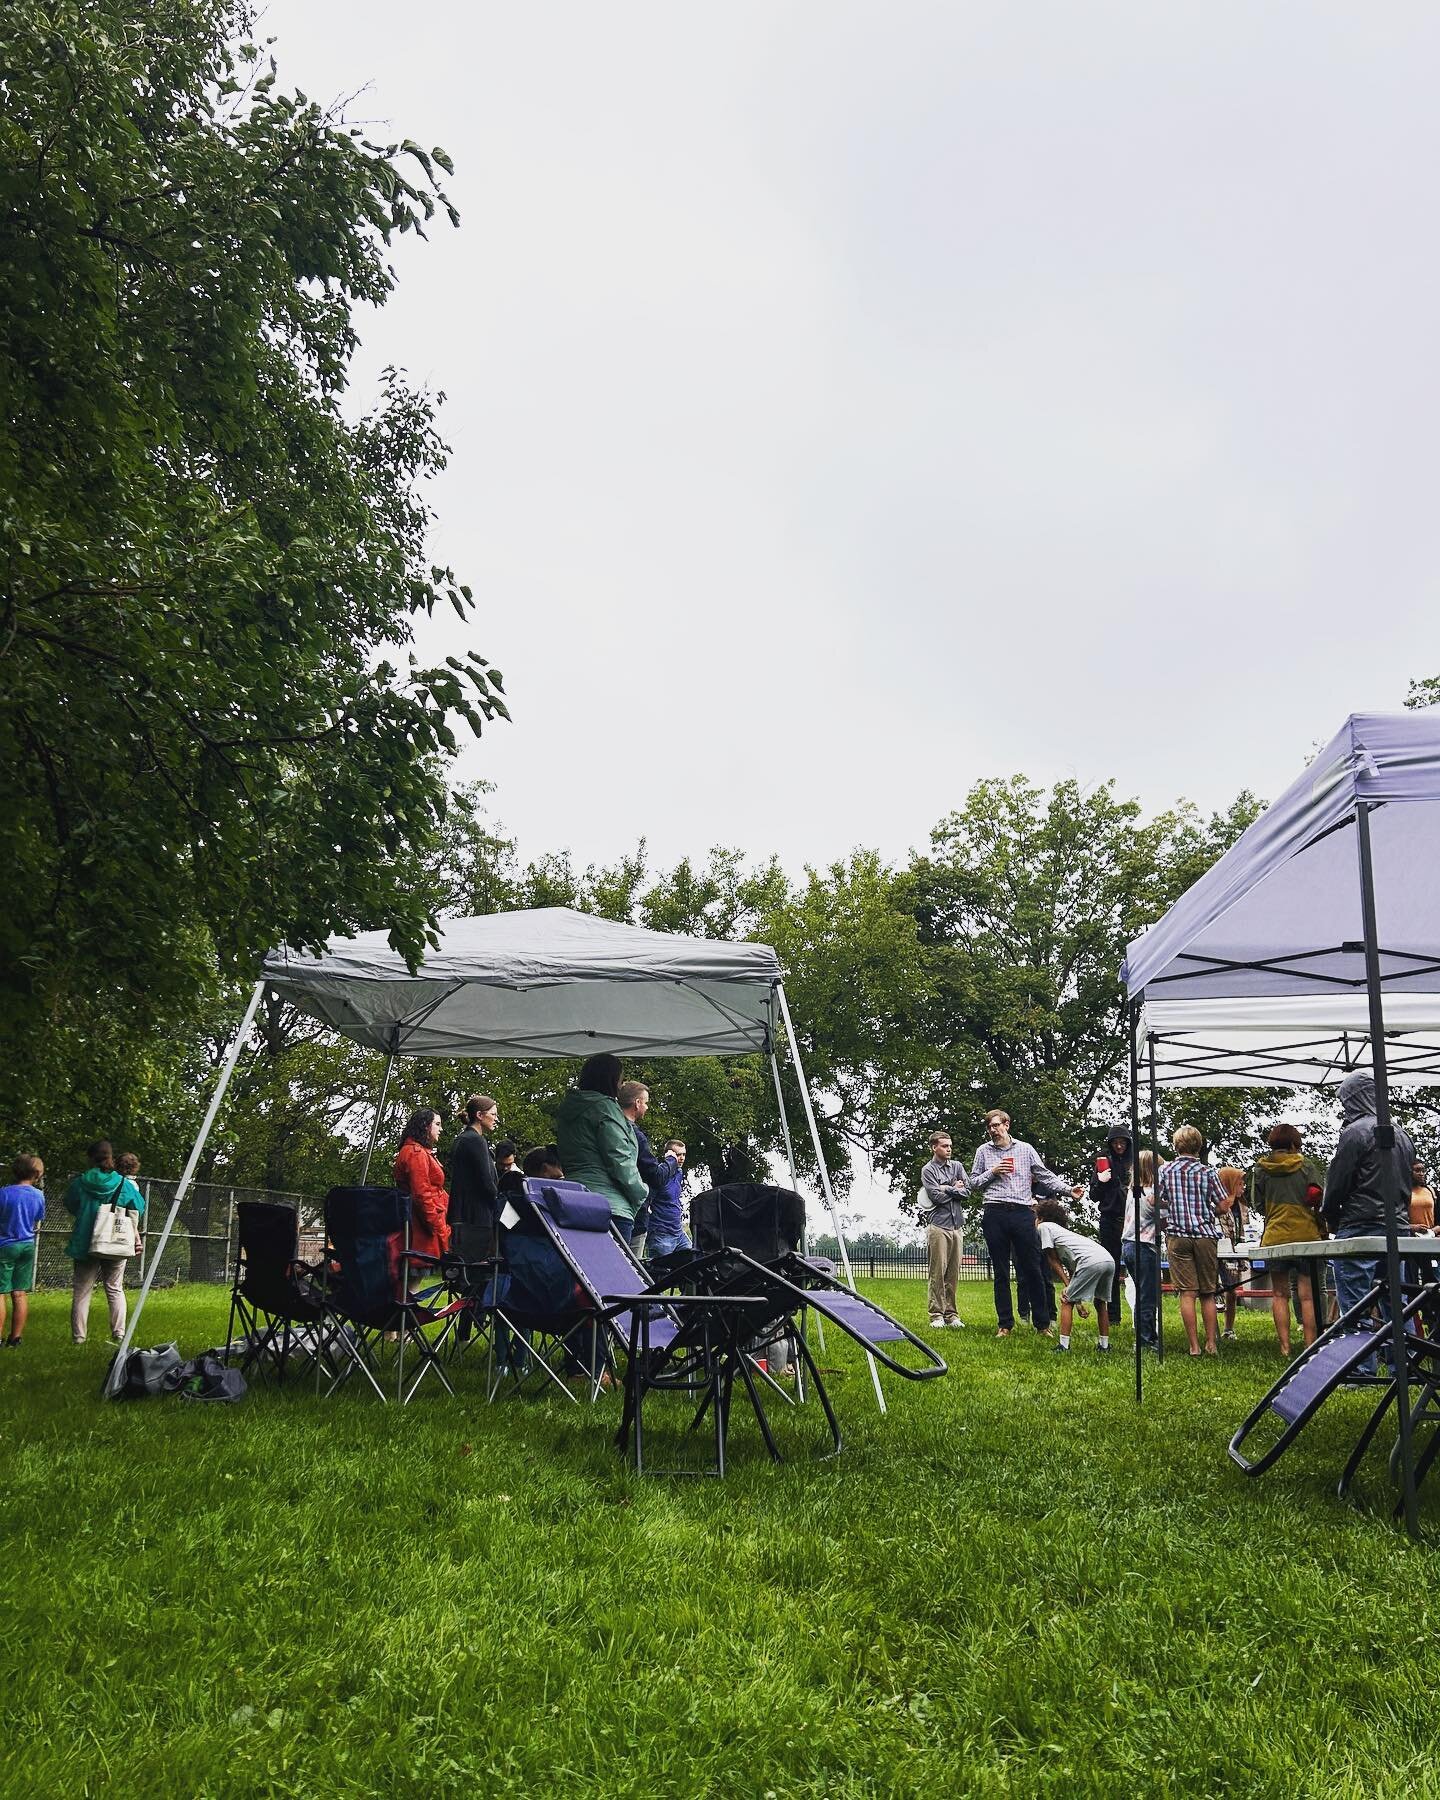 Rain didn&rsquo;t stop the church from meeting at the park for a picnic and relationship building.

These are always wonderful times of meeting new people and building friendships. We hope to see you at the next one!